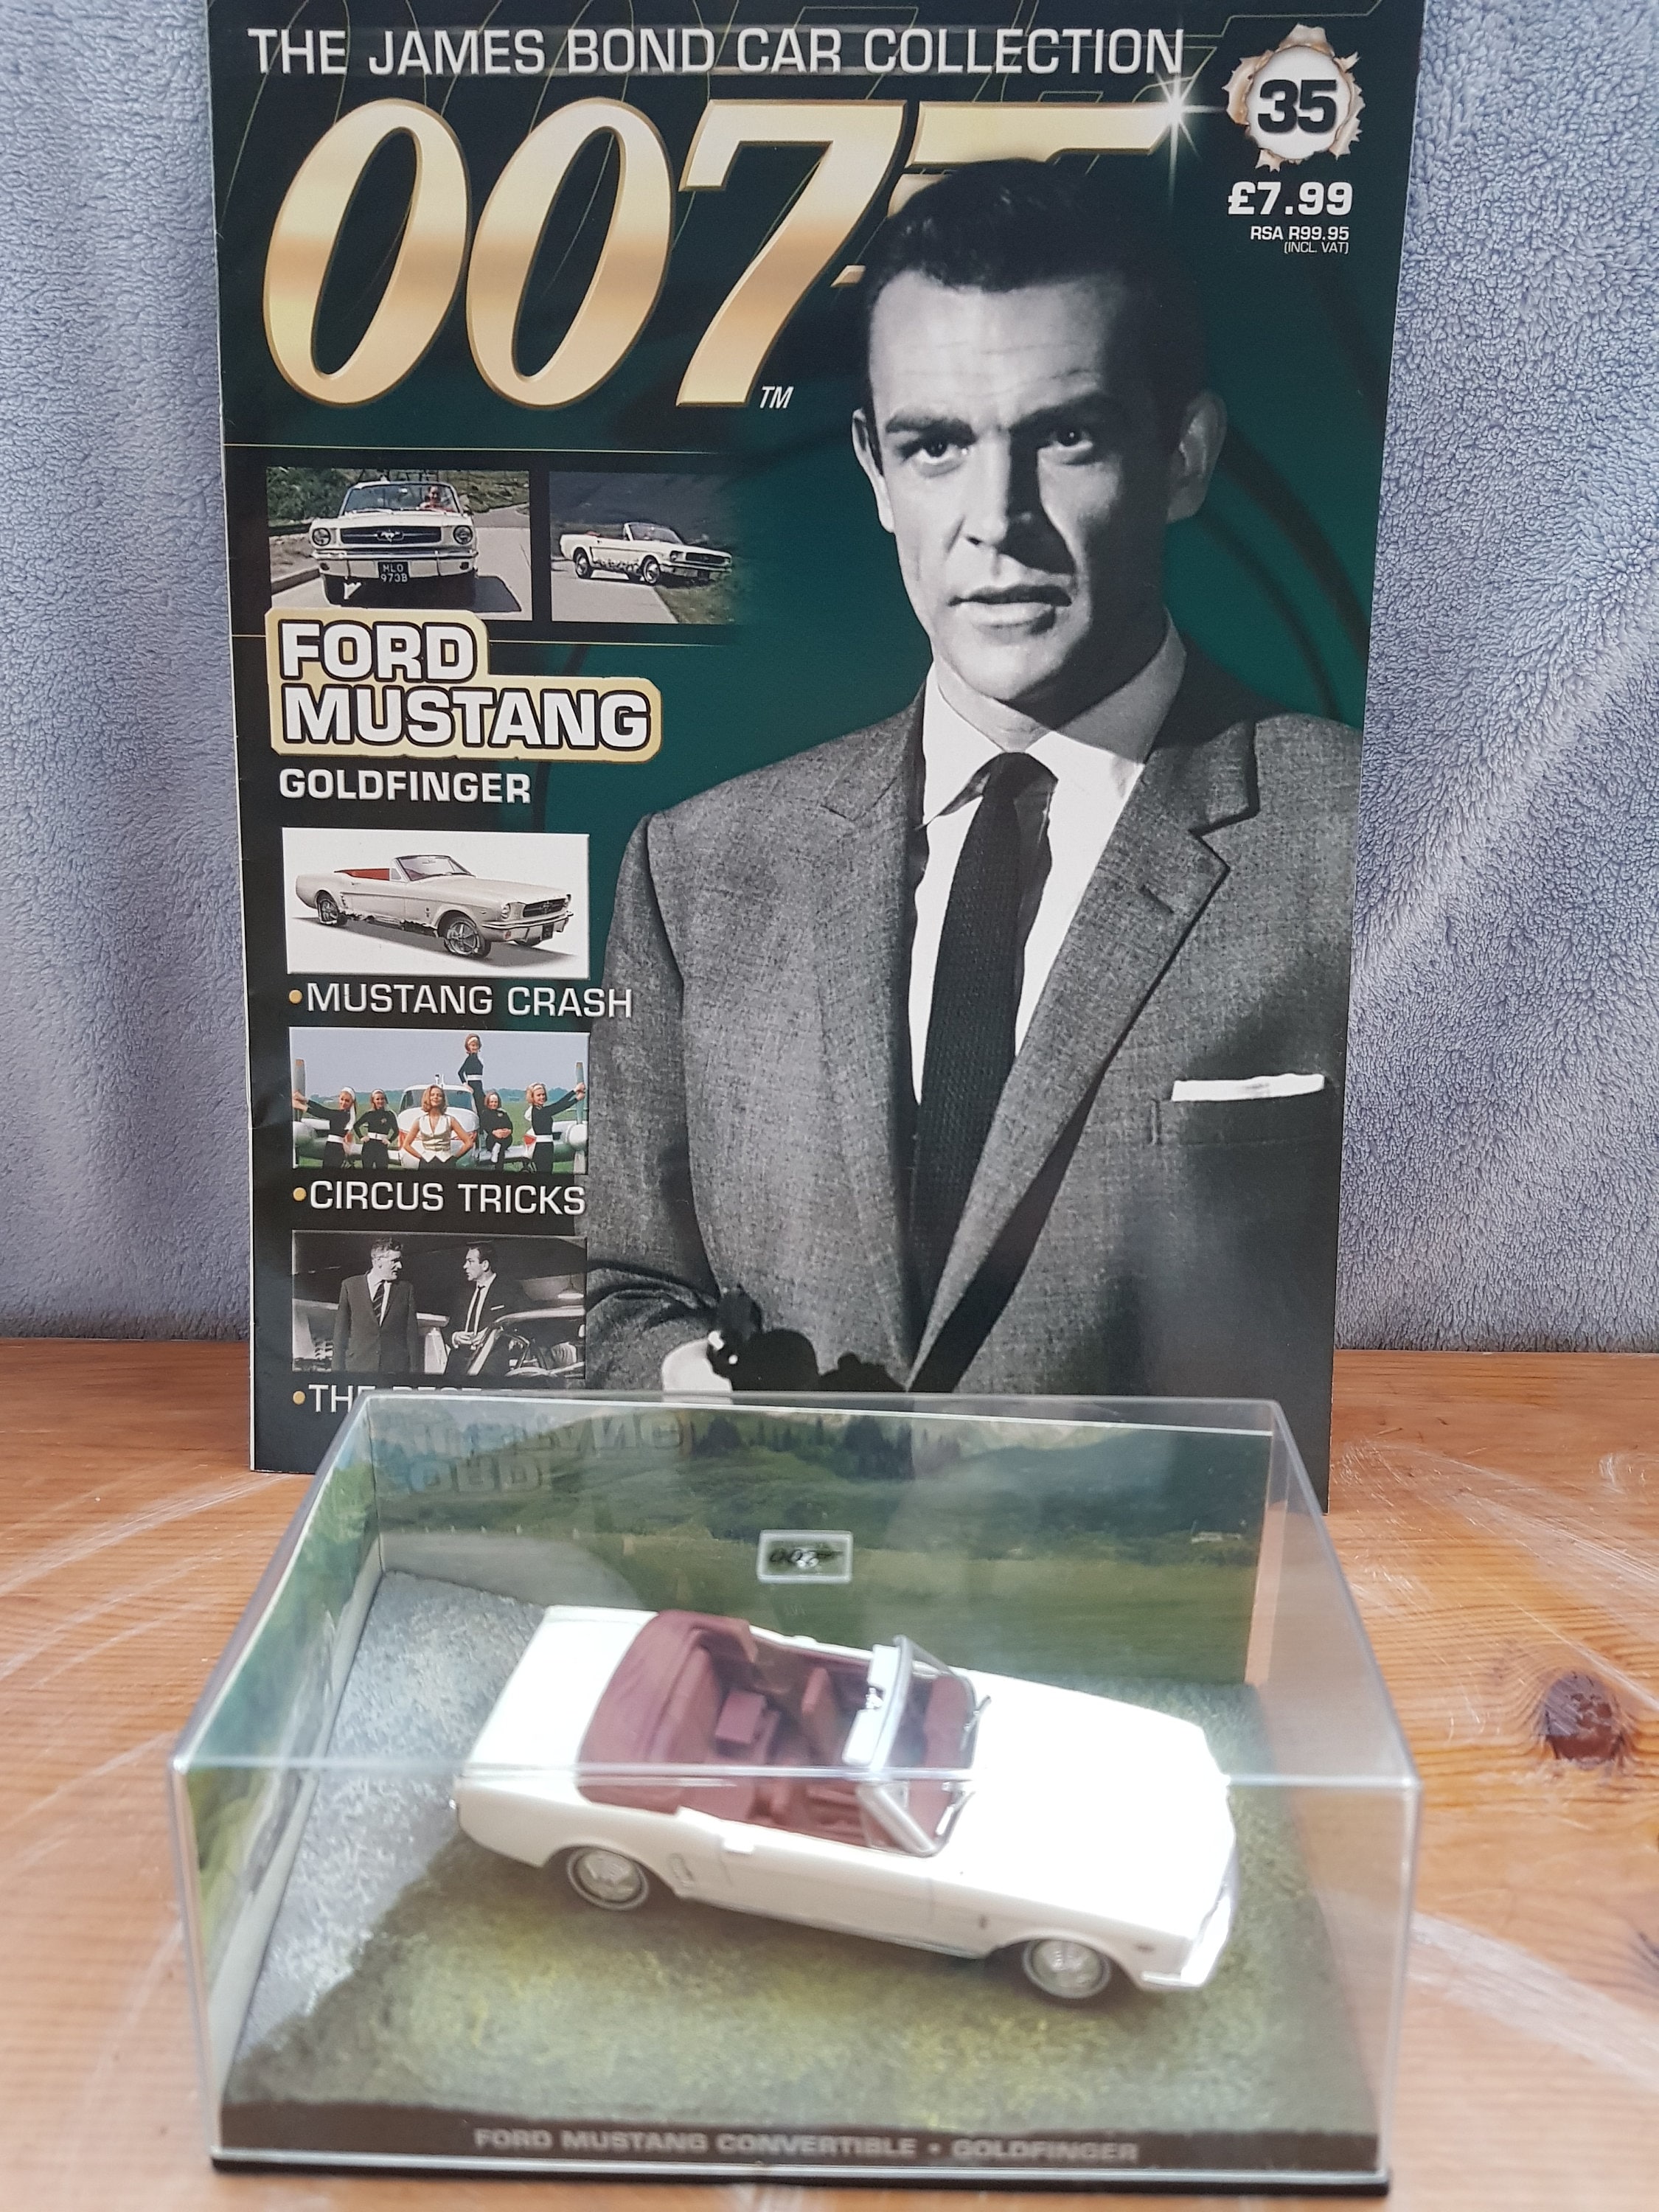 Ford Mustang Coupe 1965 Feuerball James Bond 007 1/43 Ixo Modell Auto mit oder.. 